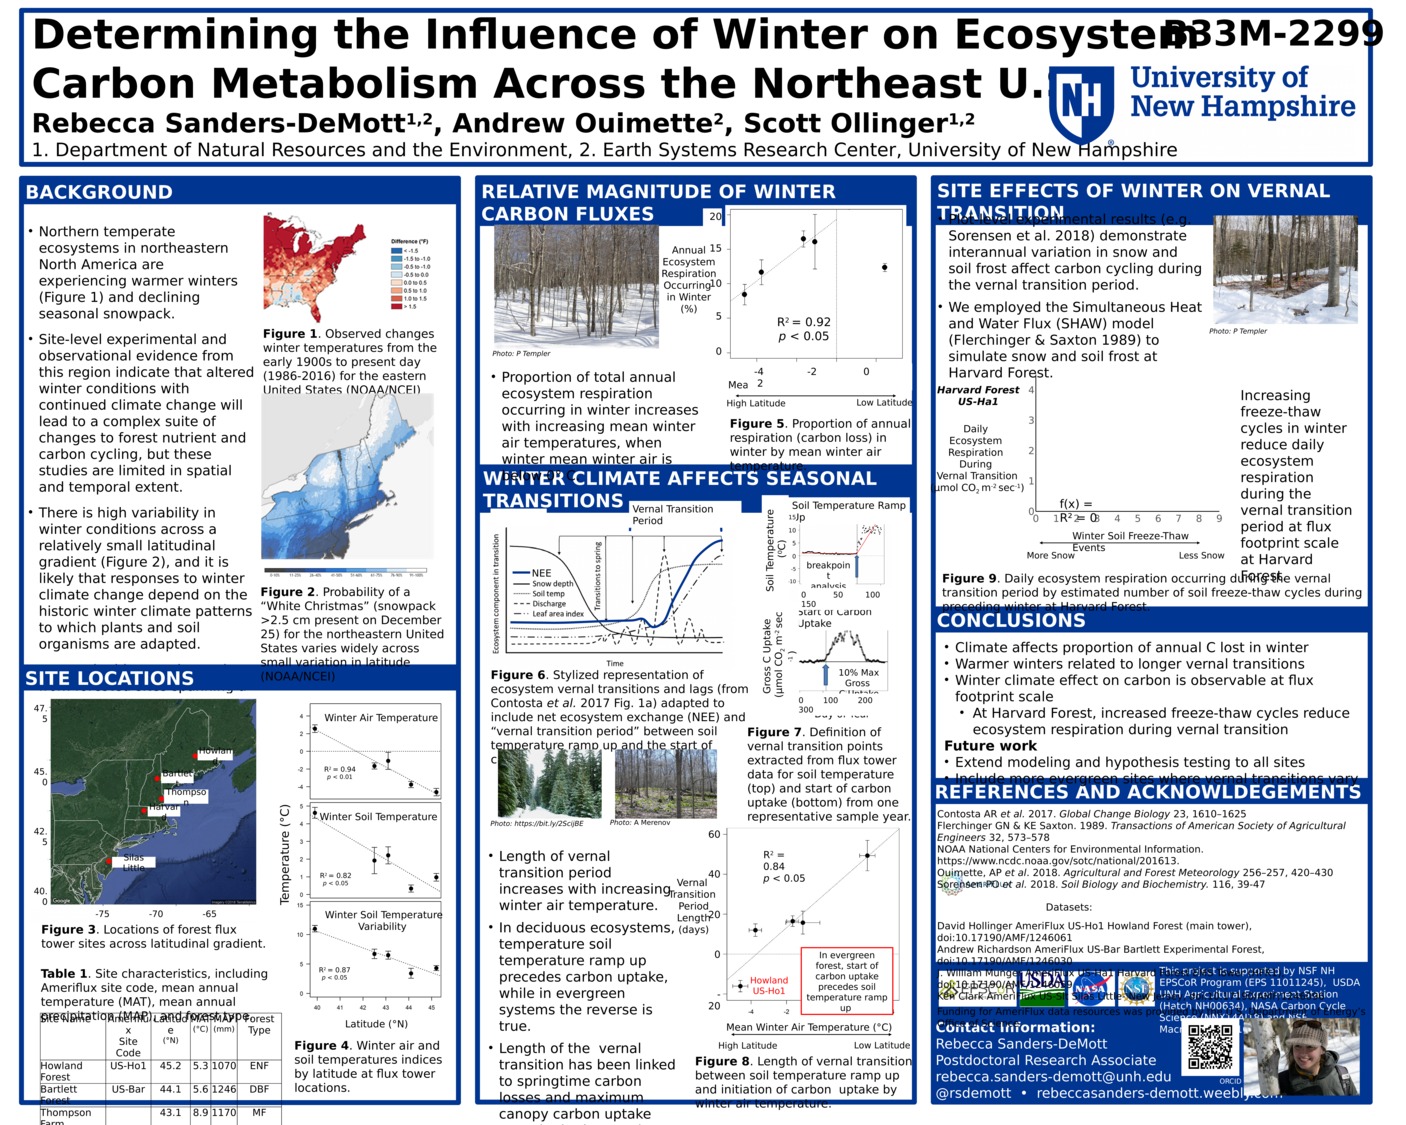 Determining The Influence Of Winter On Ecosystem  Carbon Metabolism Across The Northeast U.S. by aouimette